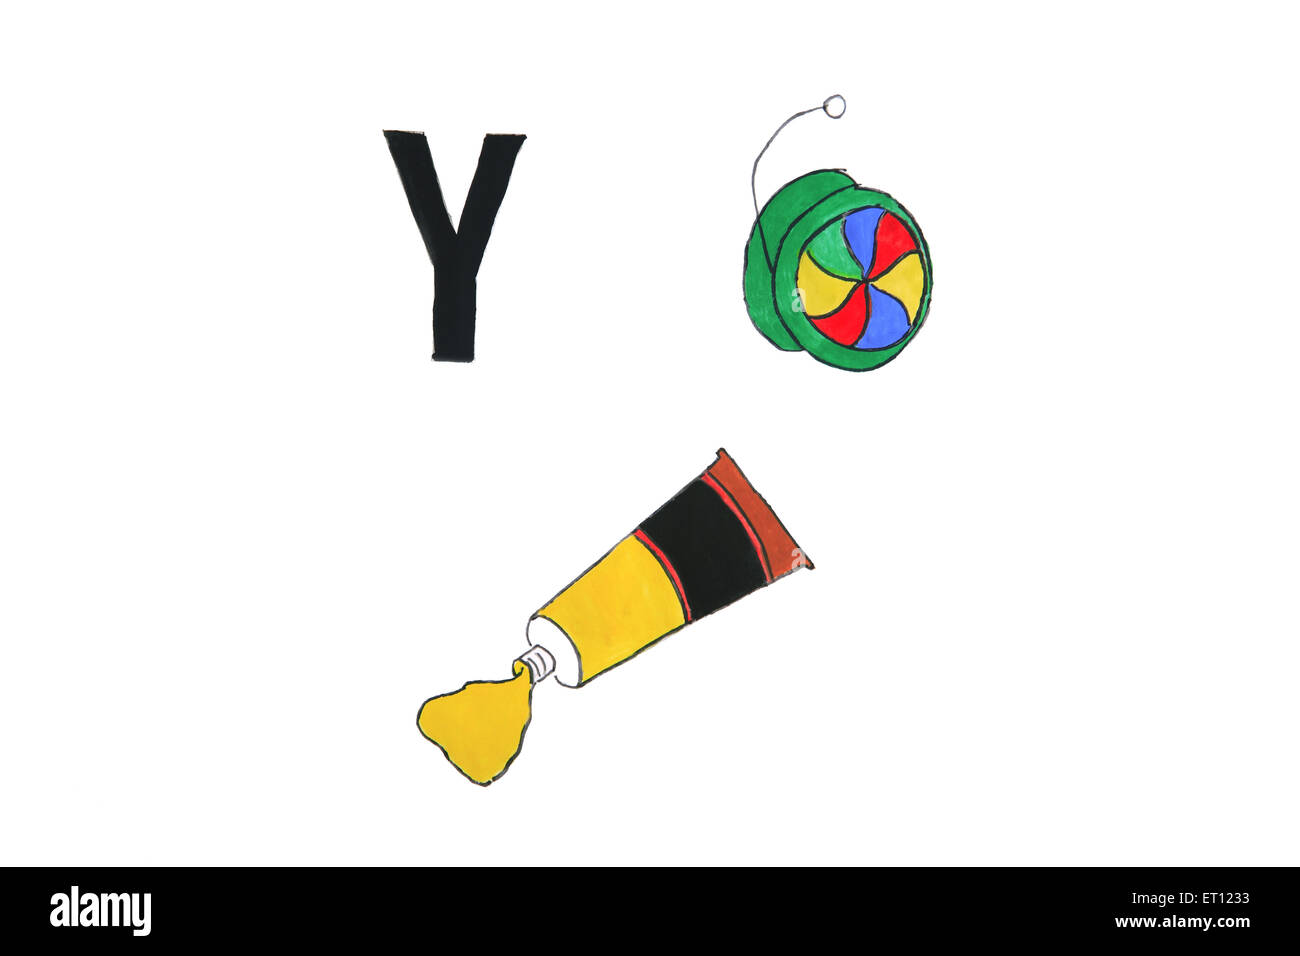 y for yellow, y for yoyo Stock Photo